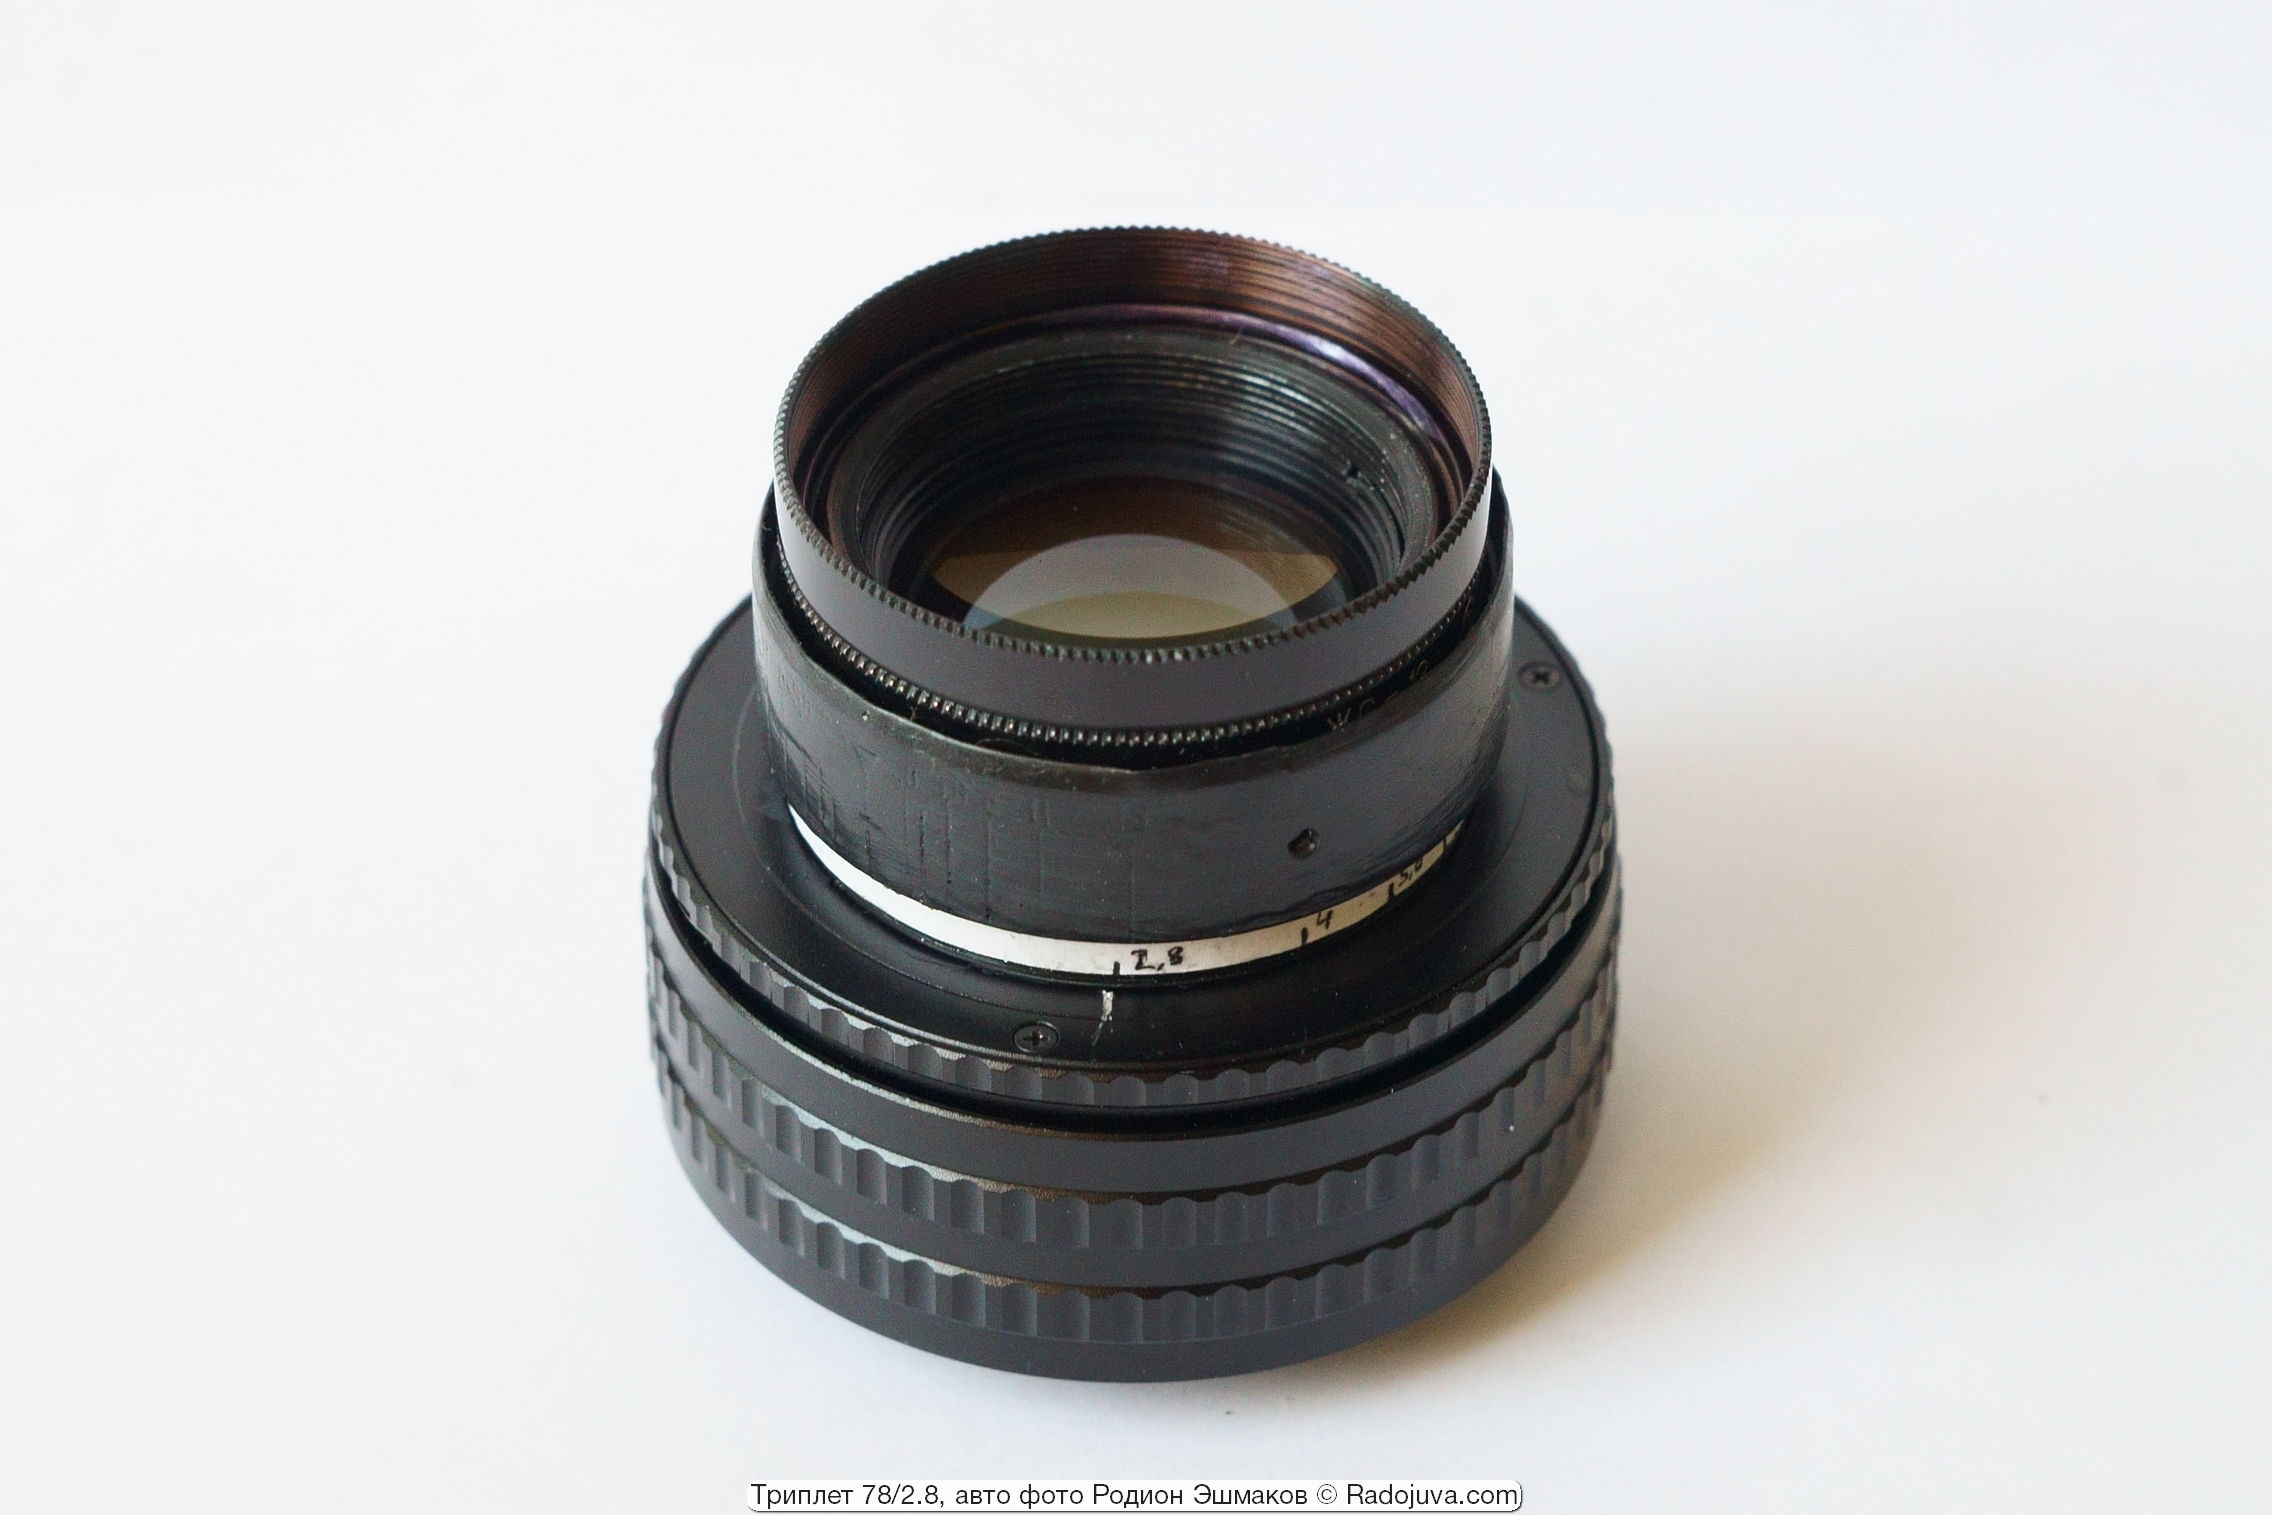 Aperture is controlled by rotating the nose of the lens. Polarizing filters are a little awkward to work with.